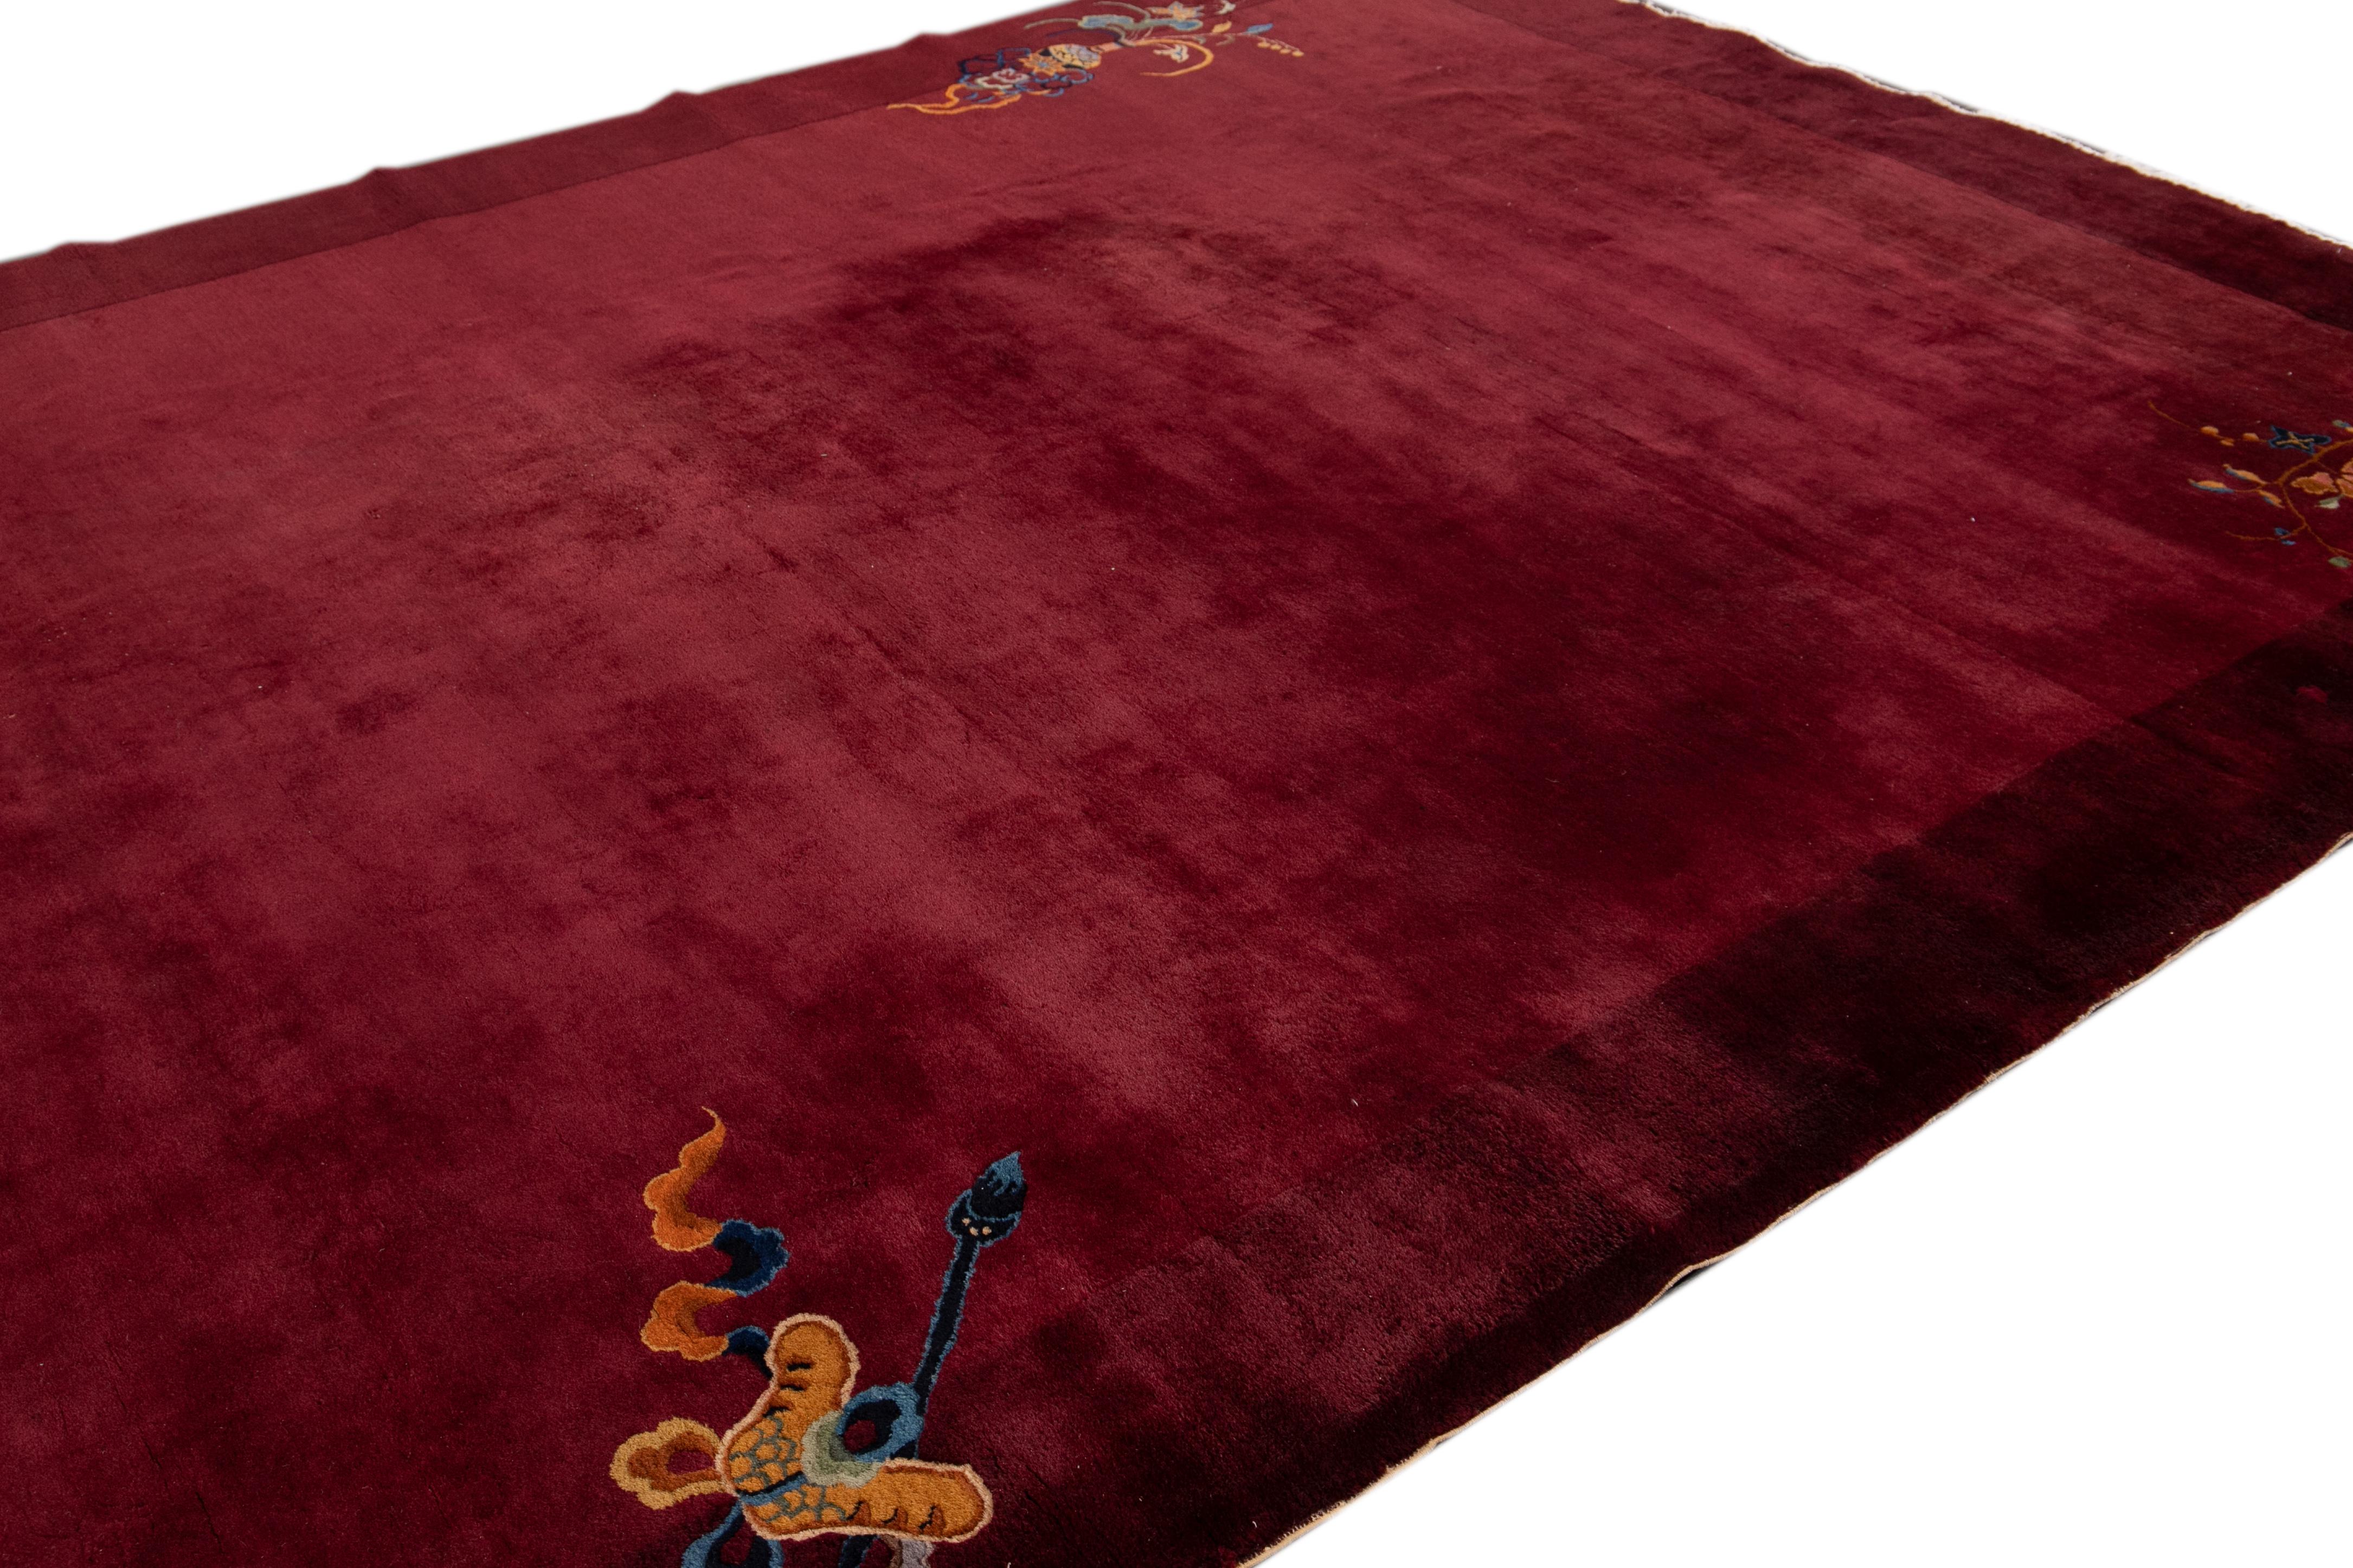 20th Century Antique Burgundy Red Art Deco Chinese Wool Rug 9 Ft X 11 Ft 6 In